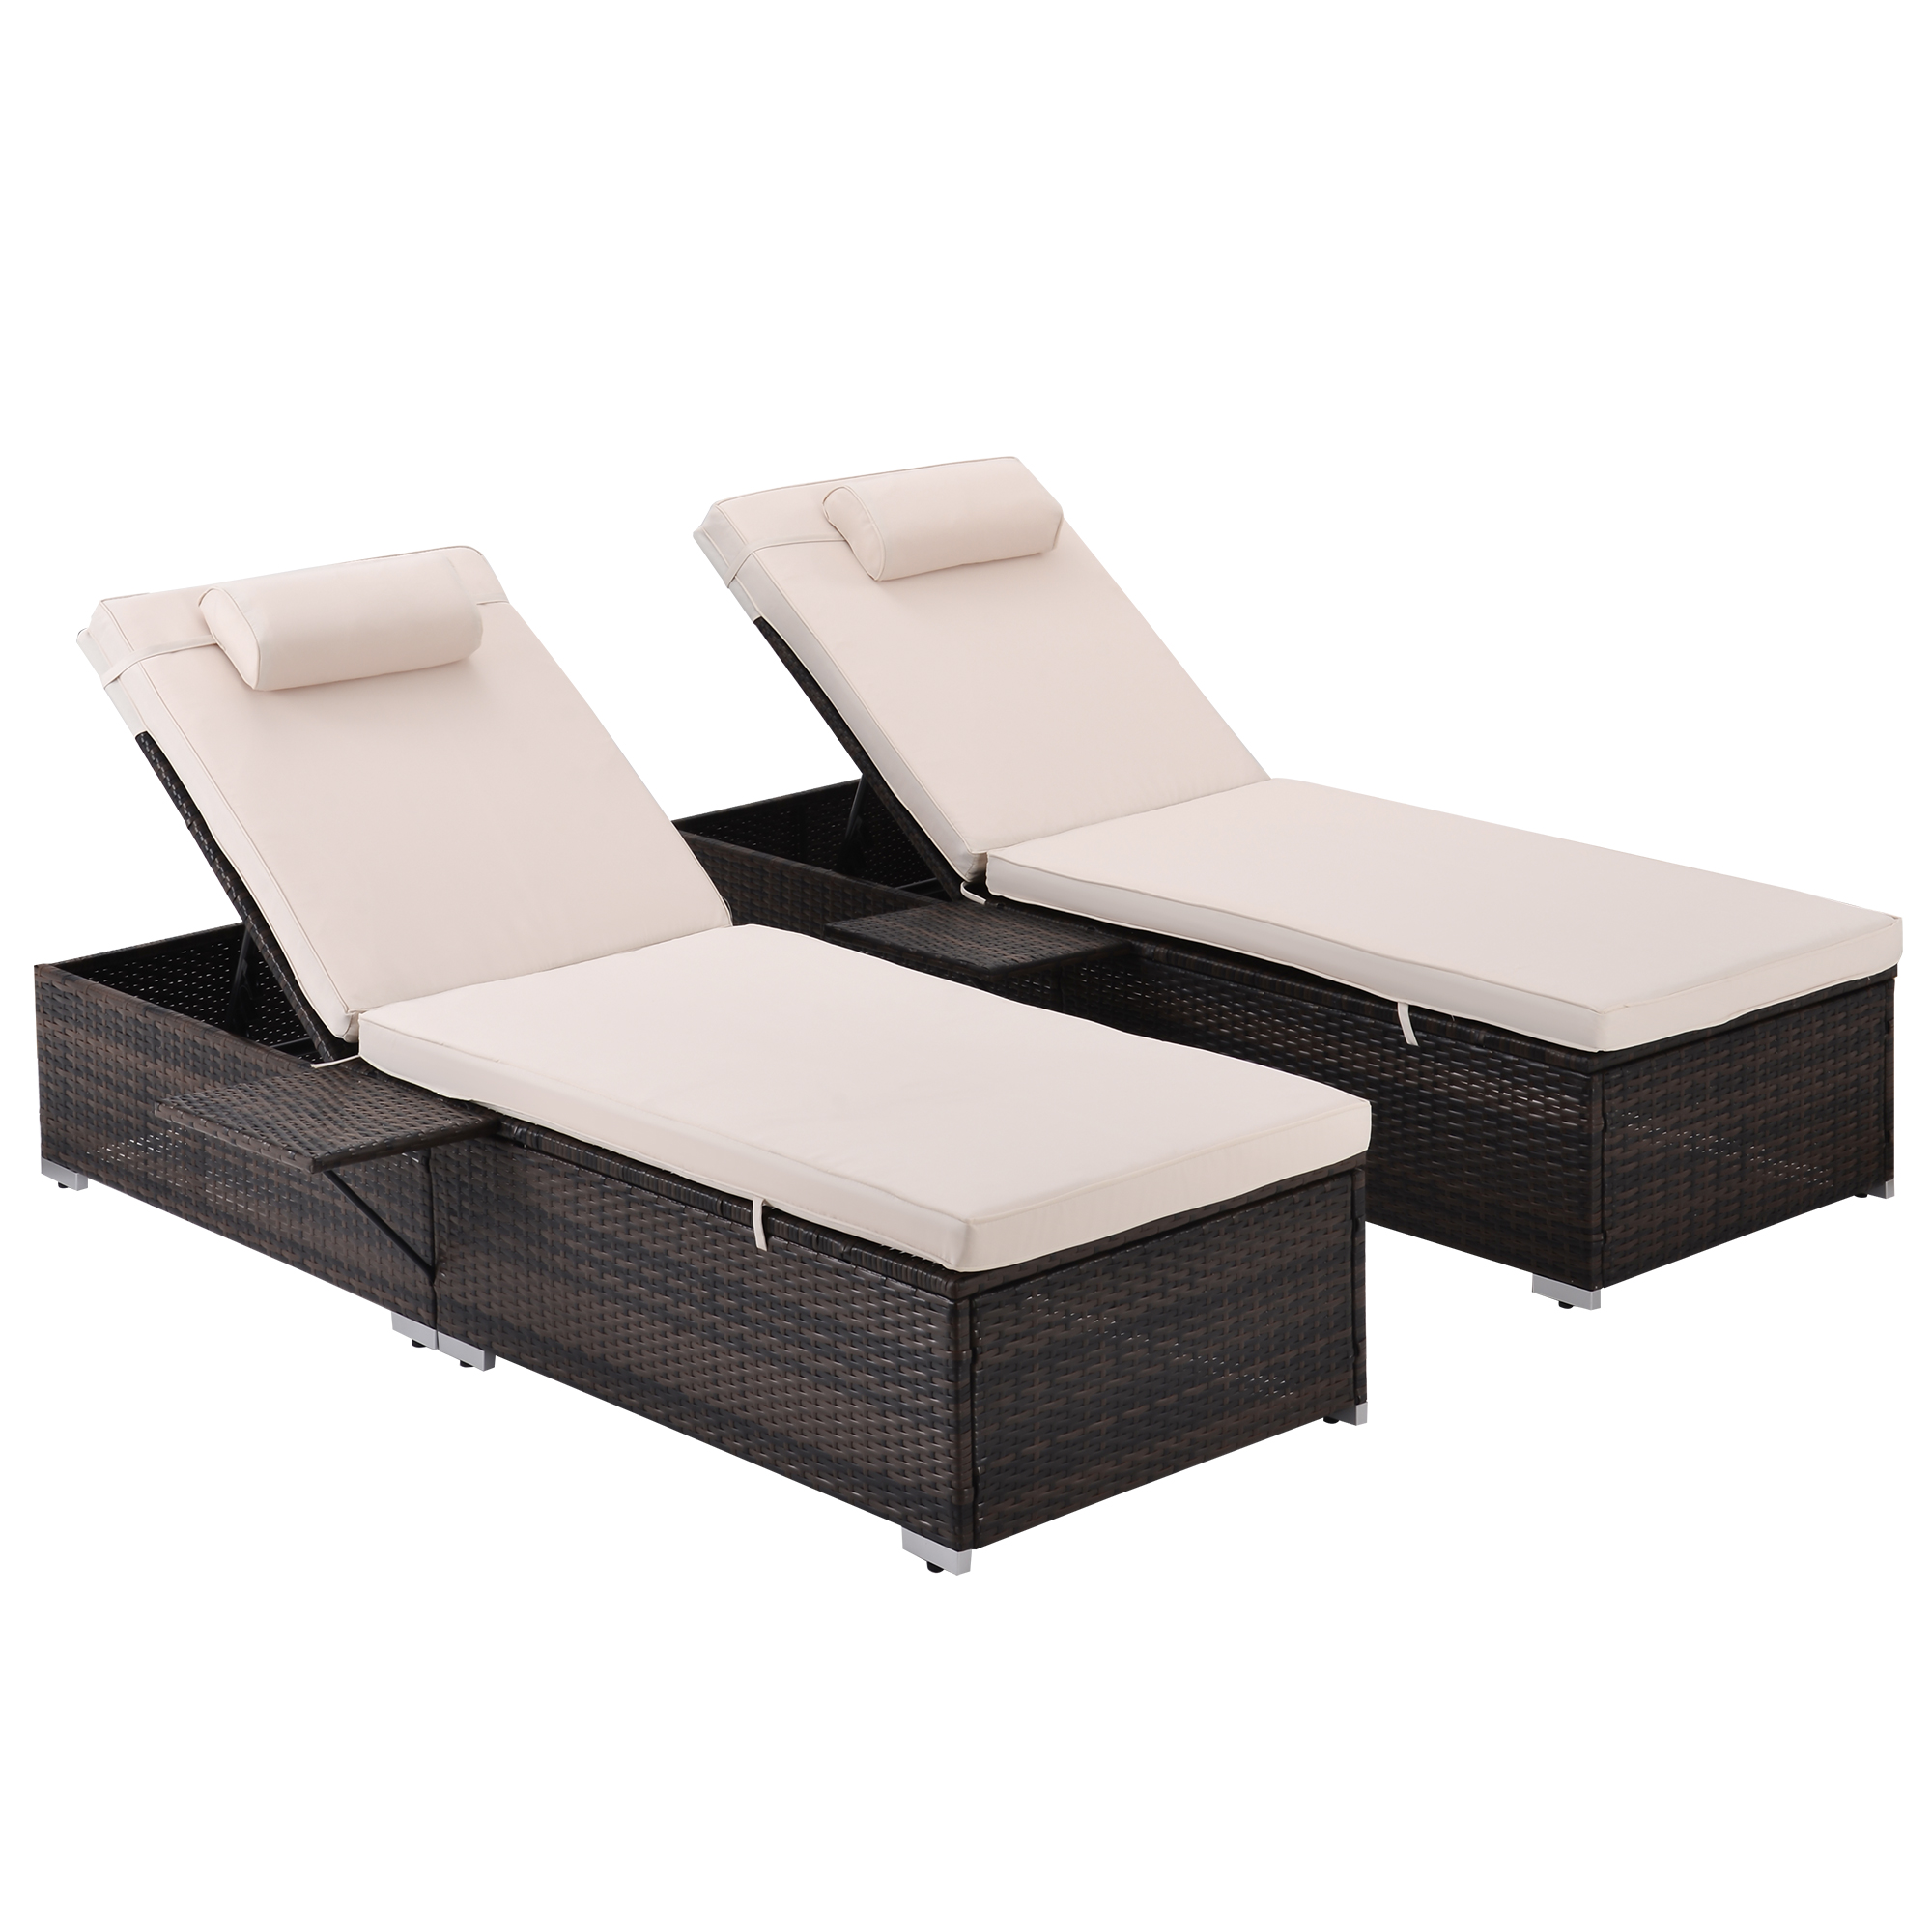 SYNGAR 2 PCS Patio Furniture Outdoor Patio Lounge Chairs, Adjustable Reclining Chair, Lawn Poolside Chaise Lounge Chair, PE Rattan Patio Seating with Side Table, Comfort Head Pillow, Brown & Beige - image 5 of 10